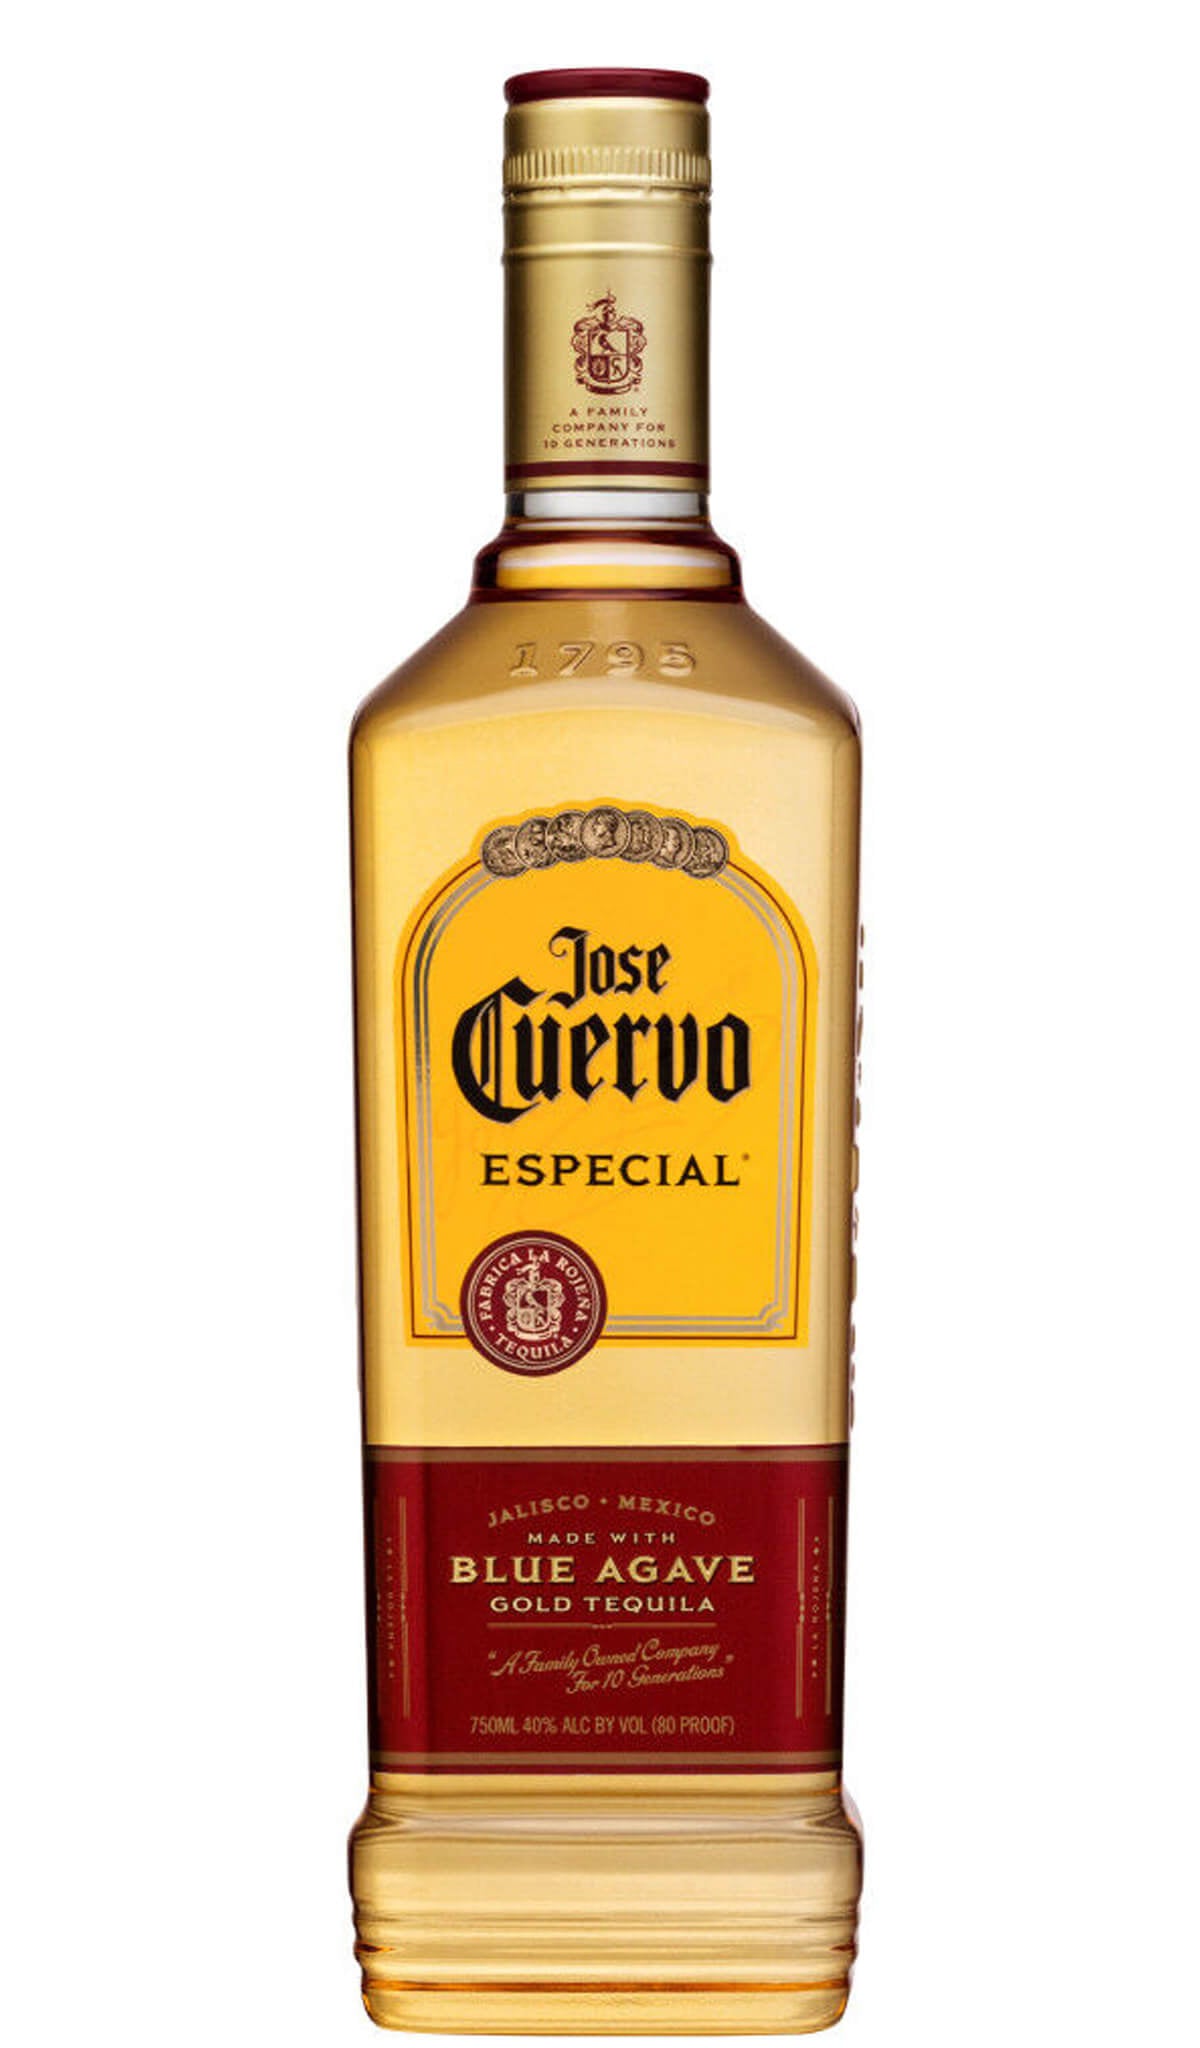 Find out more, explore the range and buy Jose Cuervo Especial Reposado Blue Agave Tequila 700mL available online at Wine Sellers Direct - Australia's independent liquor specialists. 